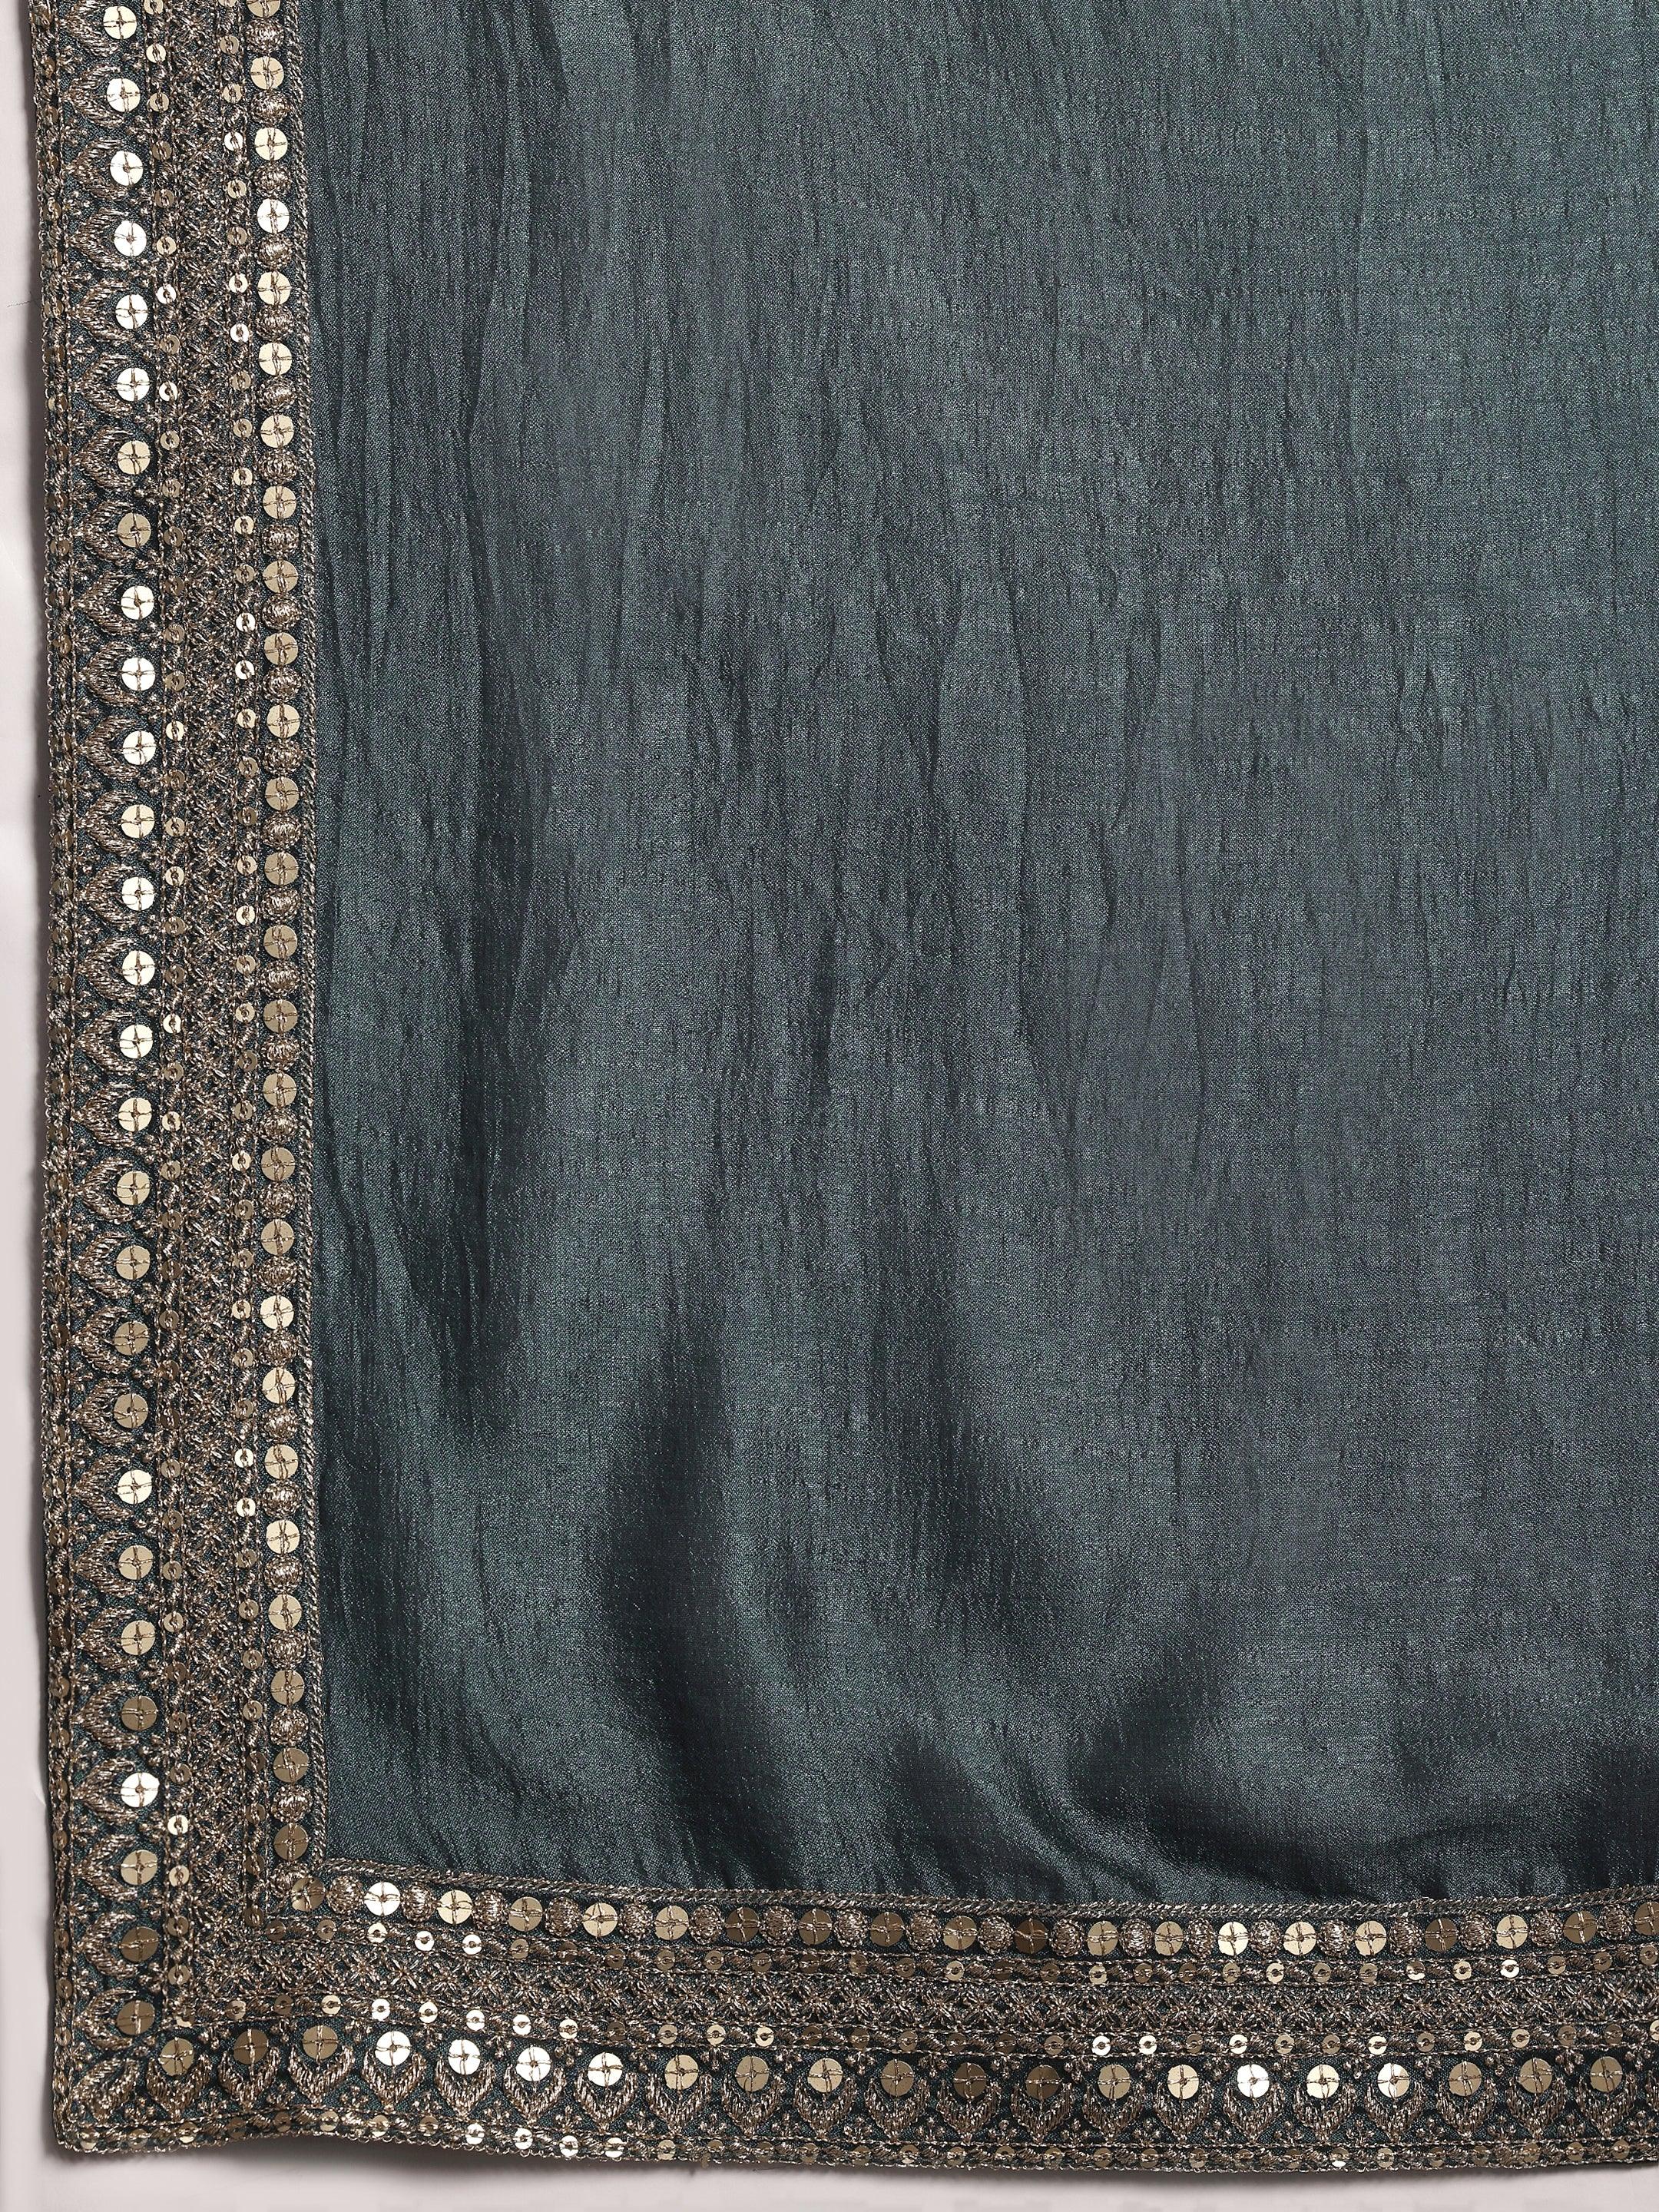 Grey Embroidered Silk Blend Pakistani Suit